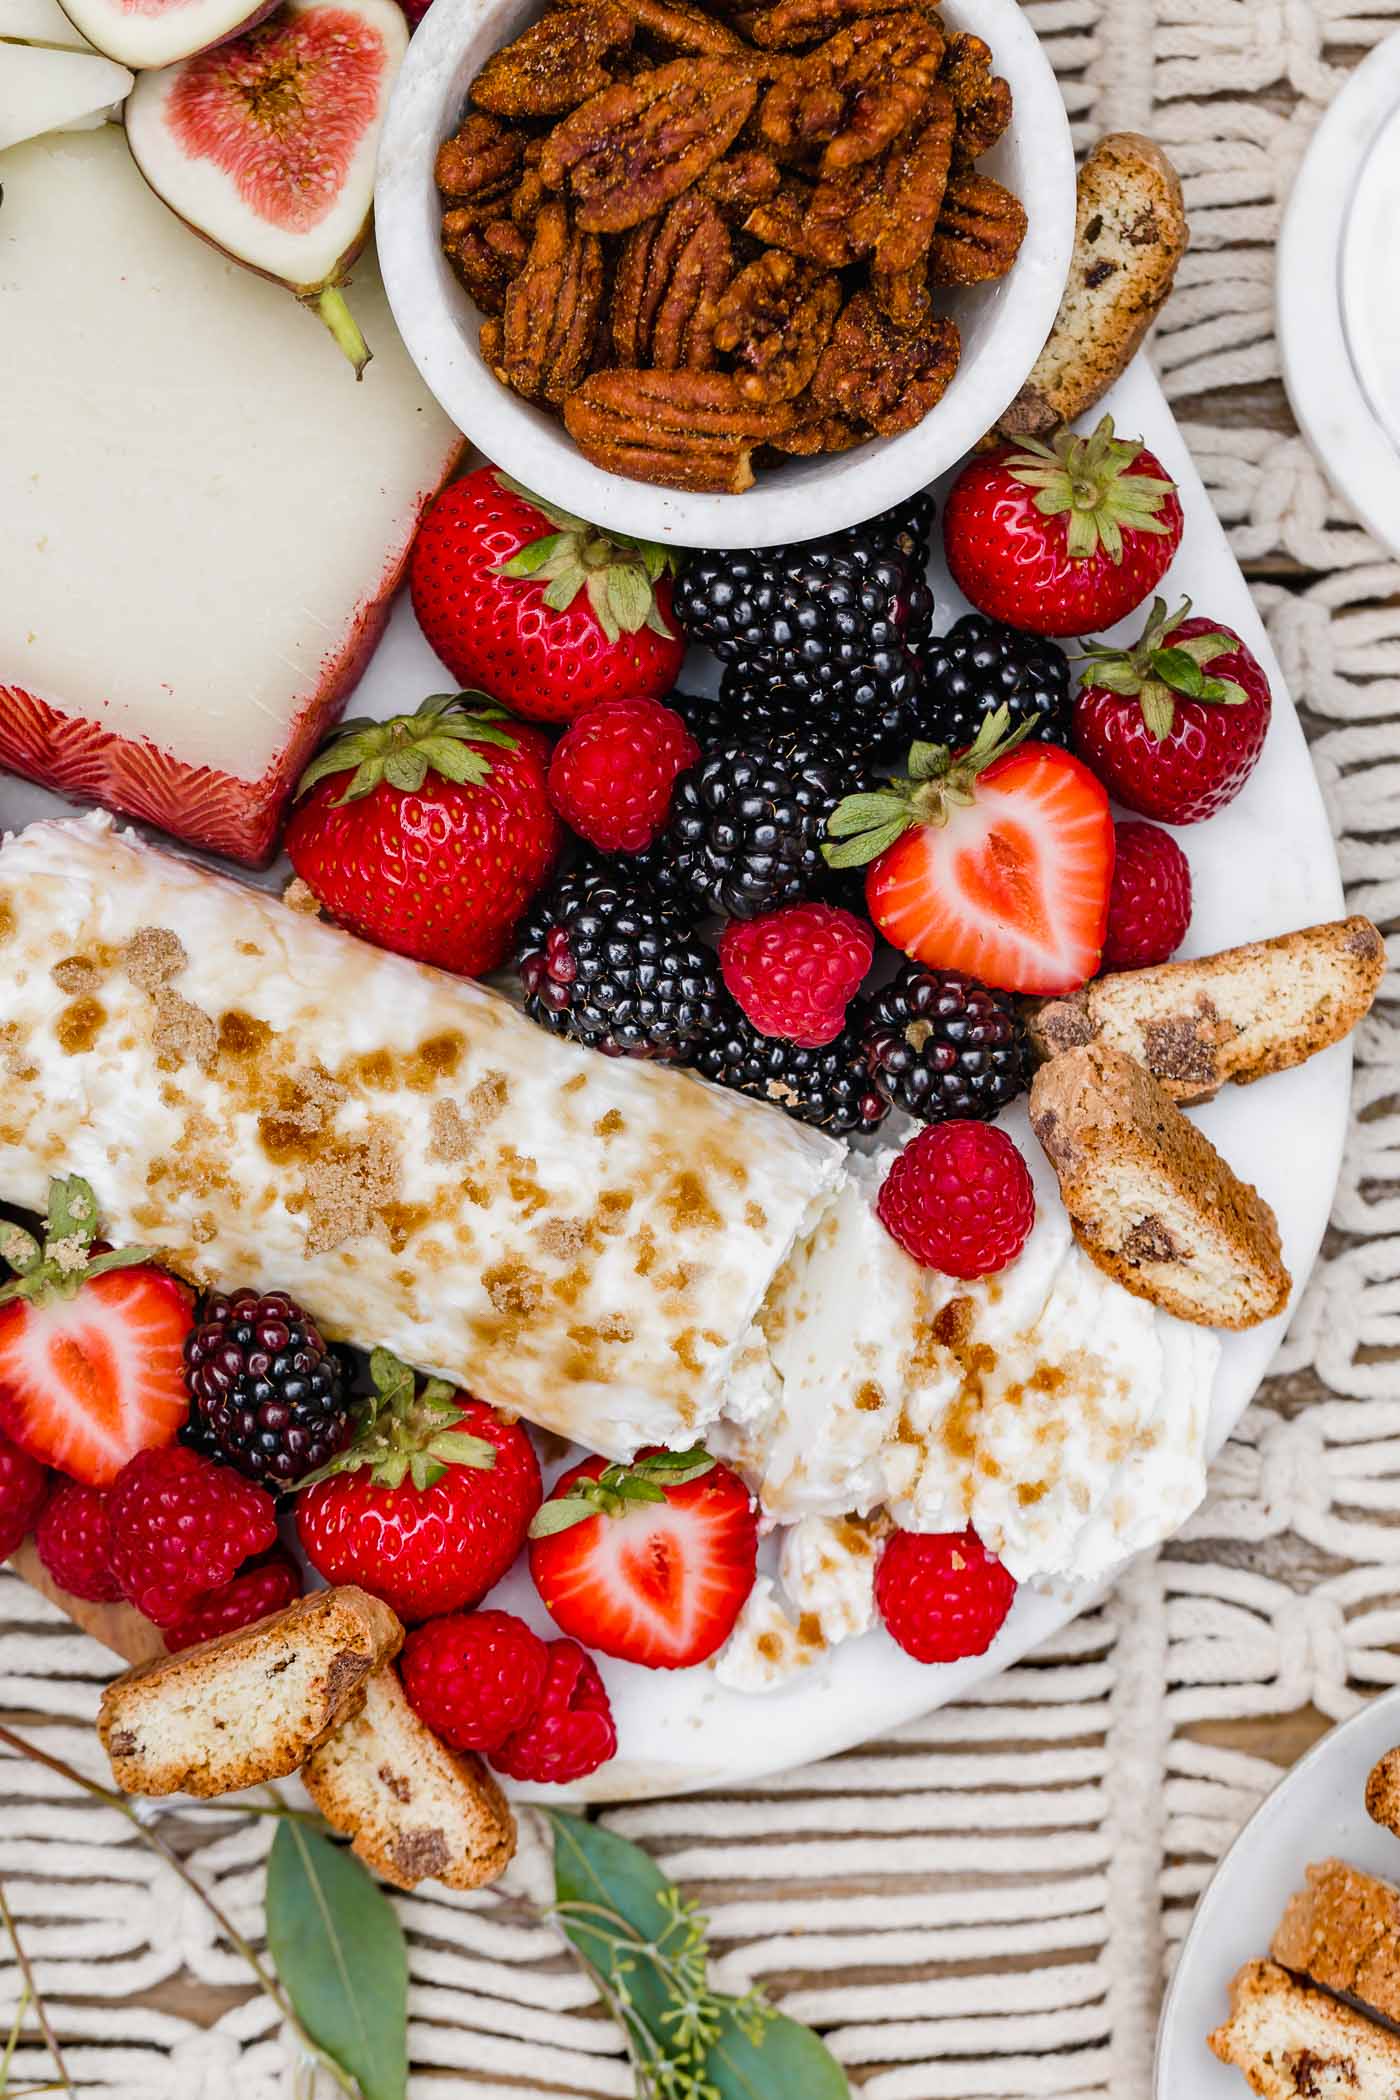 this dessert cheese board is filled with after-dinner cheeses, fresh berries & fall fruits, & includes the perfect wine pairings! the best snacks & appetizers to serve for the ultimate girls night or dinner party this fall. #playswellwithbutter #cheeseboard #dessertcheeseboardideas #cheeseboardideas #girlsnightideas #girlsnightsnacks #girlsnightappetizers #cheeseboardforfall #cheeseboarddisplay #howtomakeacheeseboard